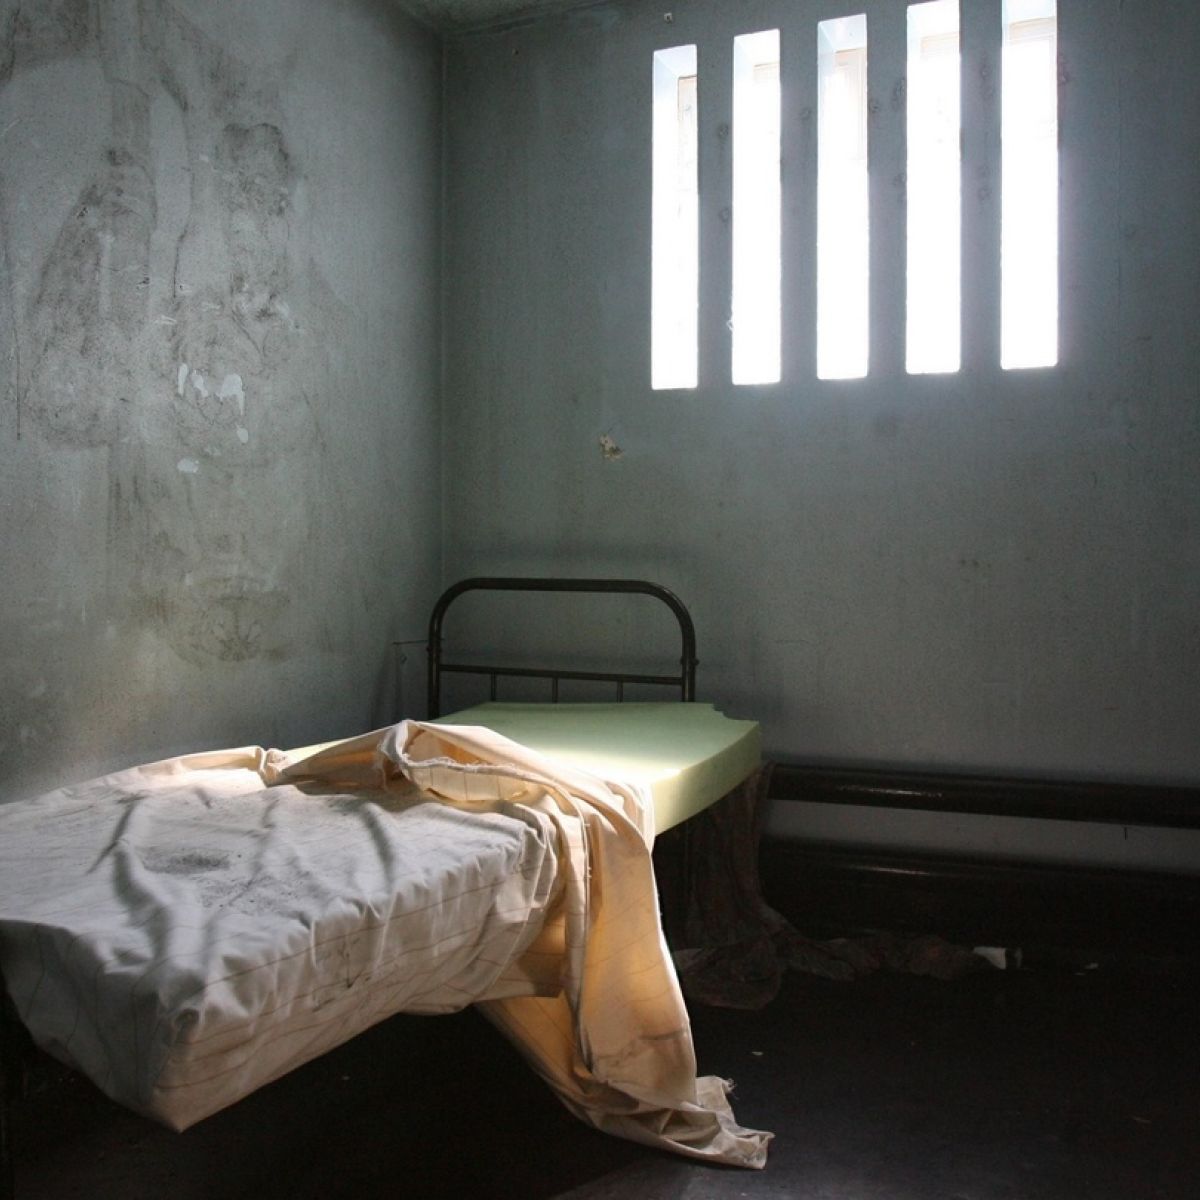 Bobby Sands' bed and Long Kesh/Maze's afterlife